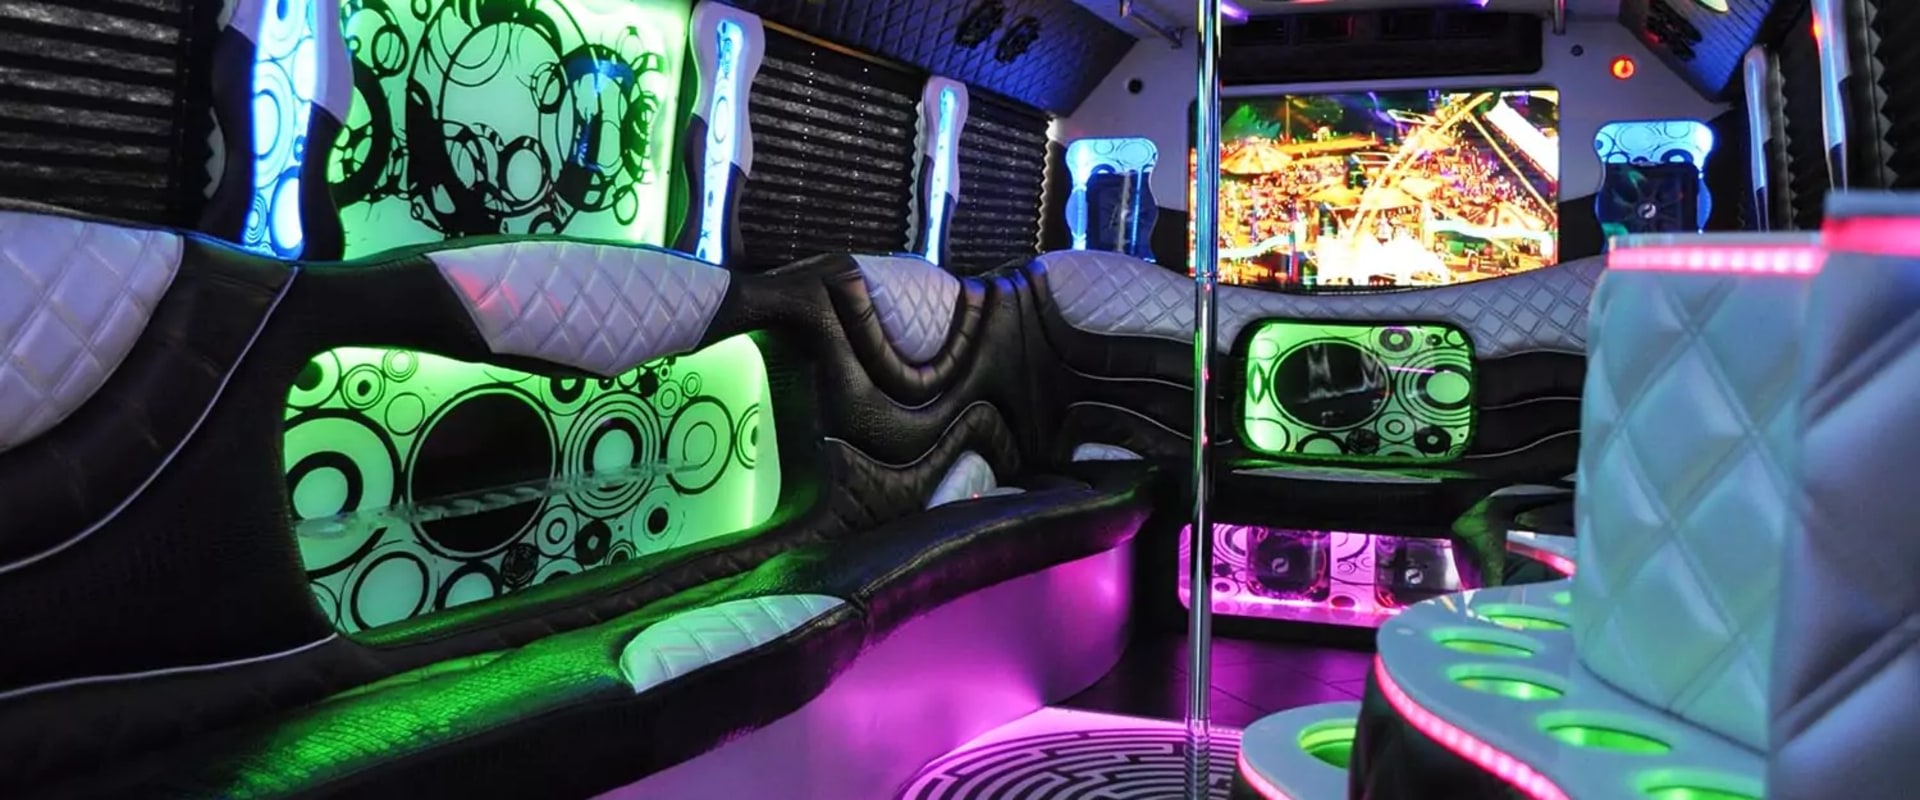 What Payment Methods Do You Accept for a Party Bus Rental?